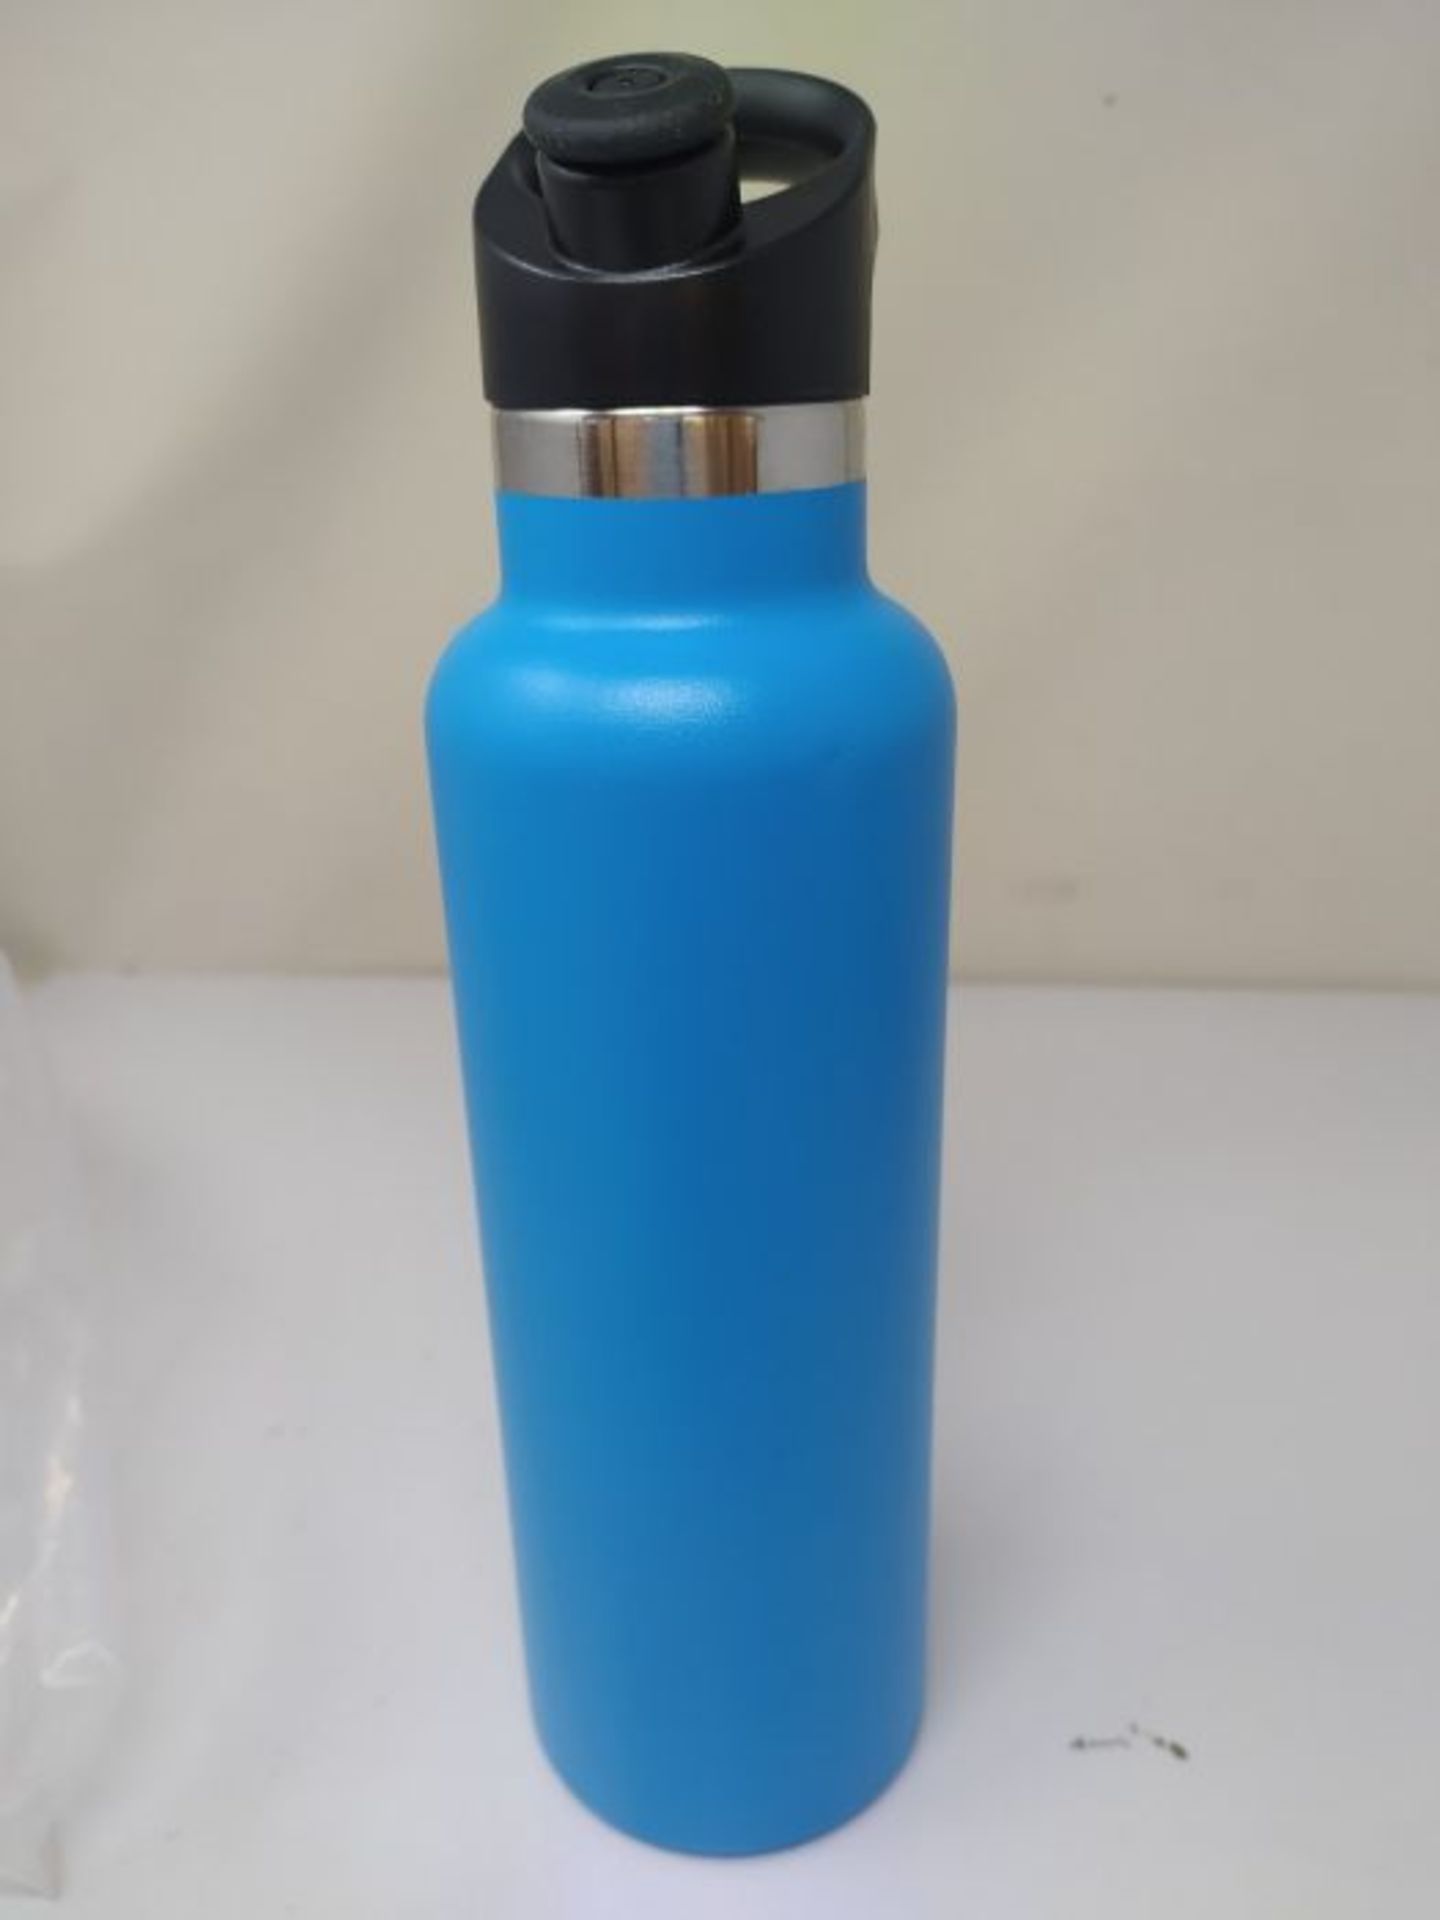 Hydro Flask - Water Bottle 621 ml (21 oz) - Vacuum Insulated Stainless Steel Water Bot - Image 2 of 2